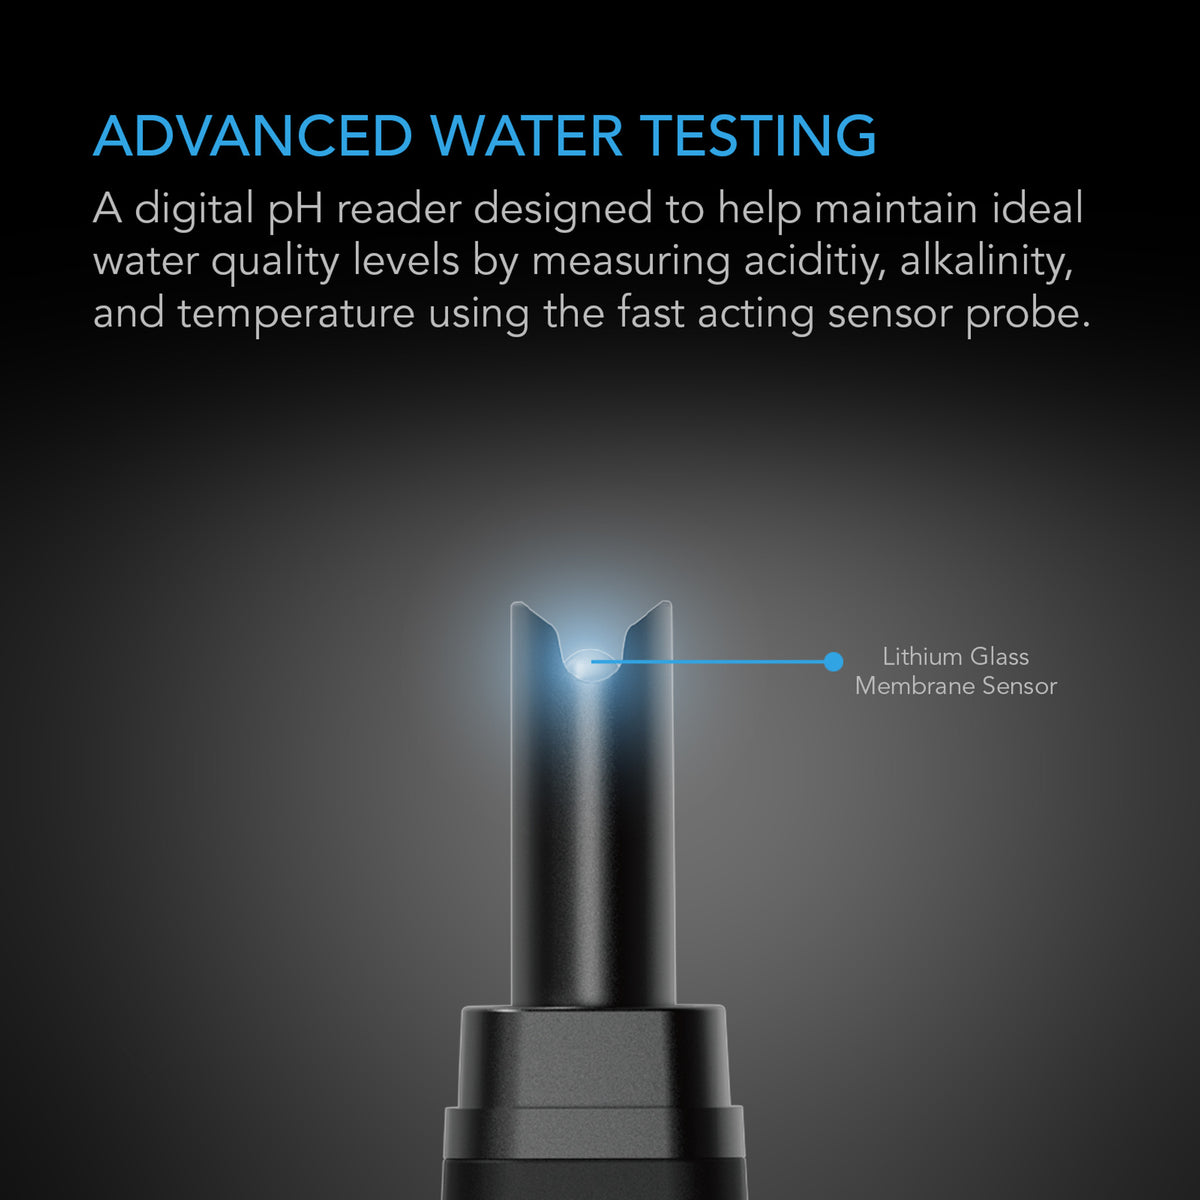 Advanced Water Testing probe and ph reader